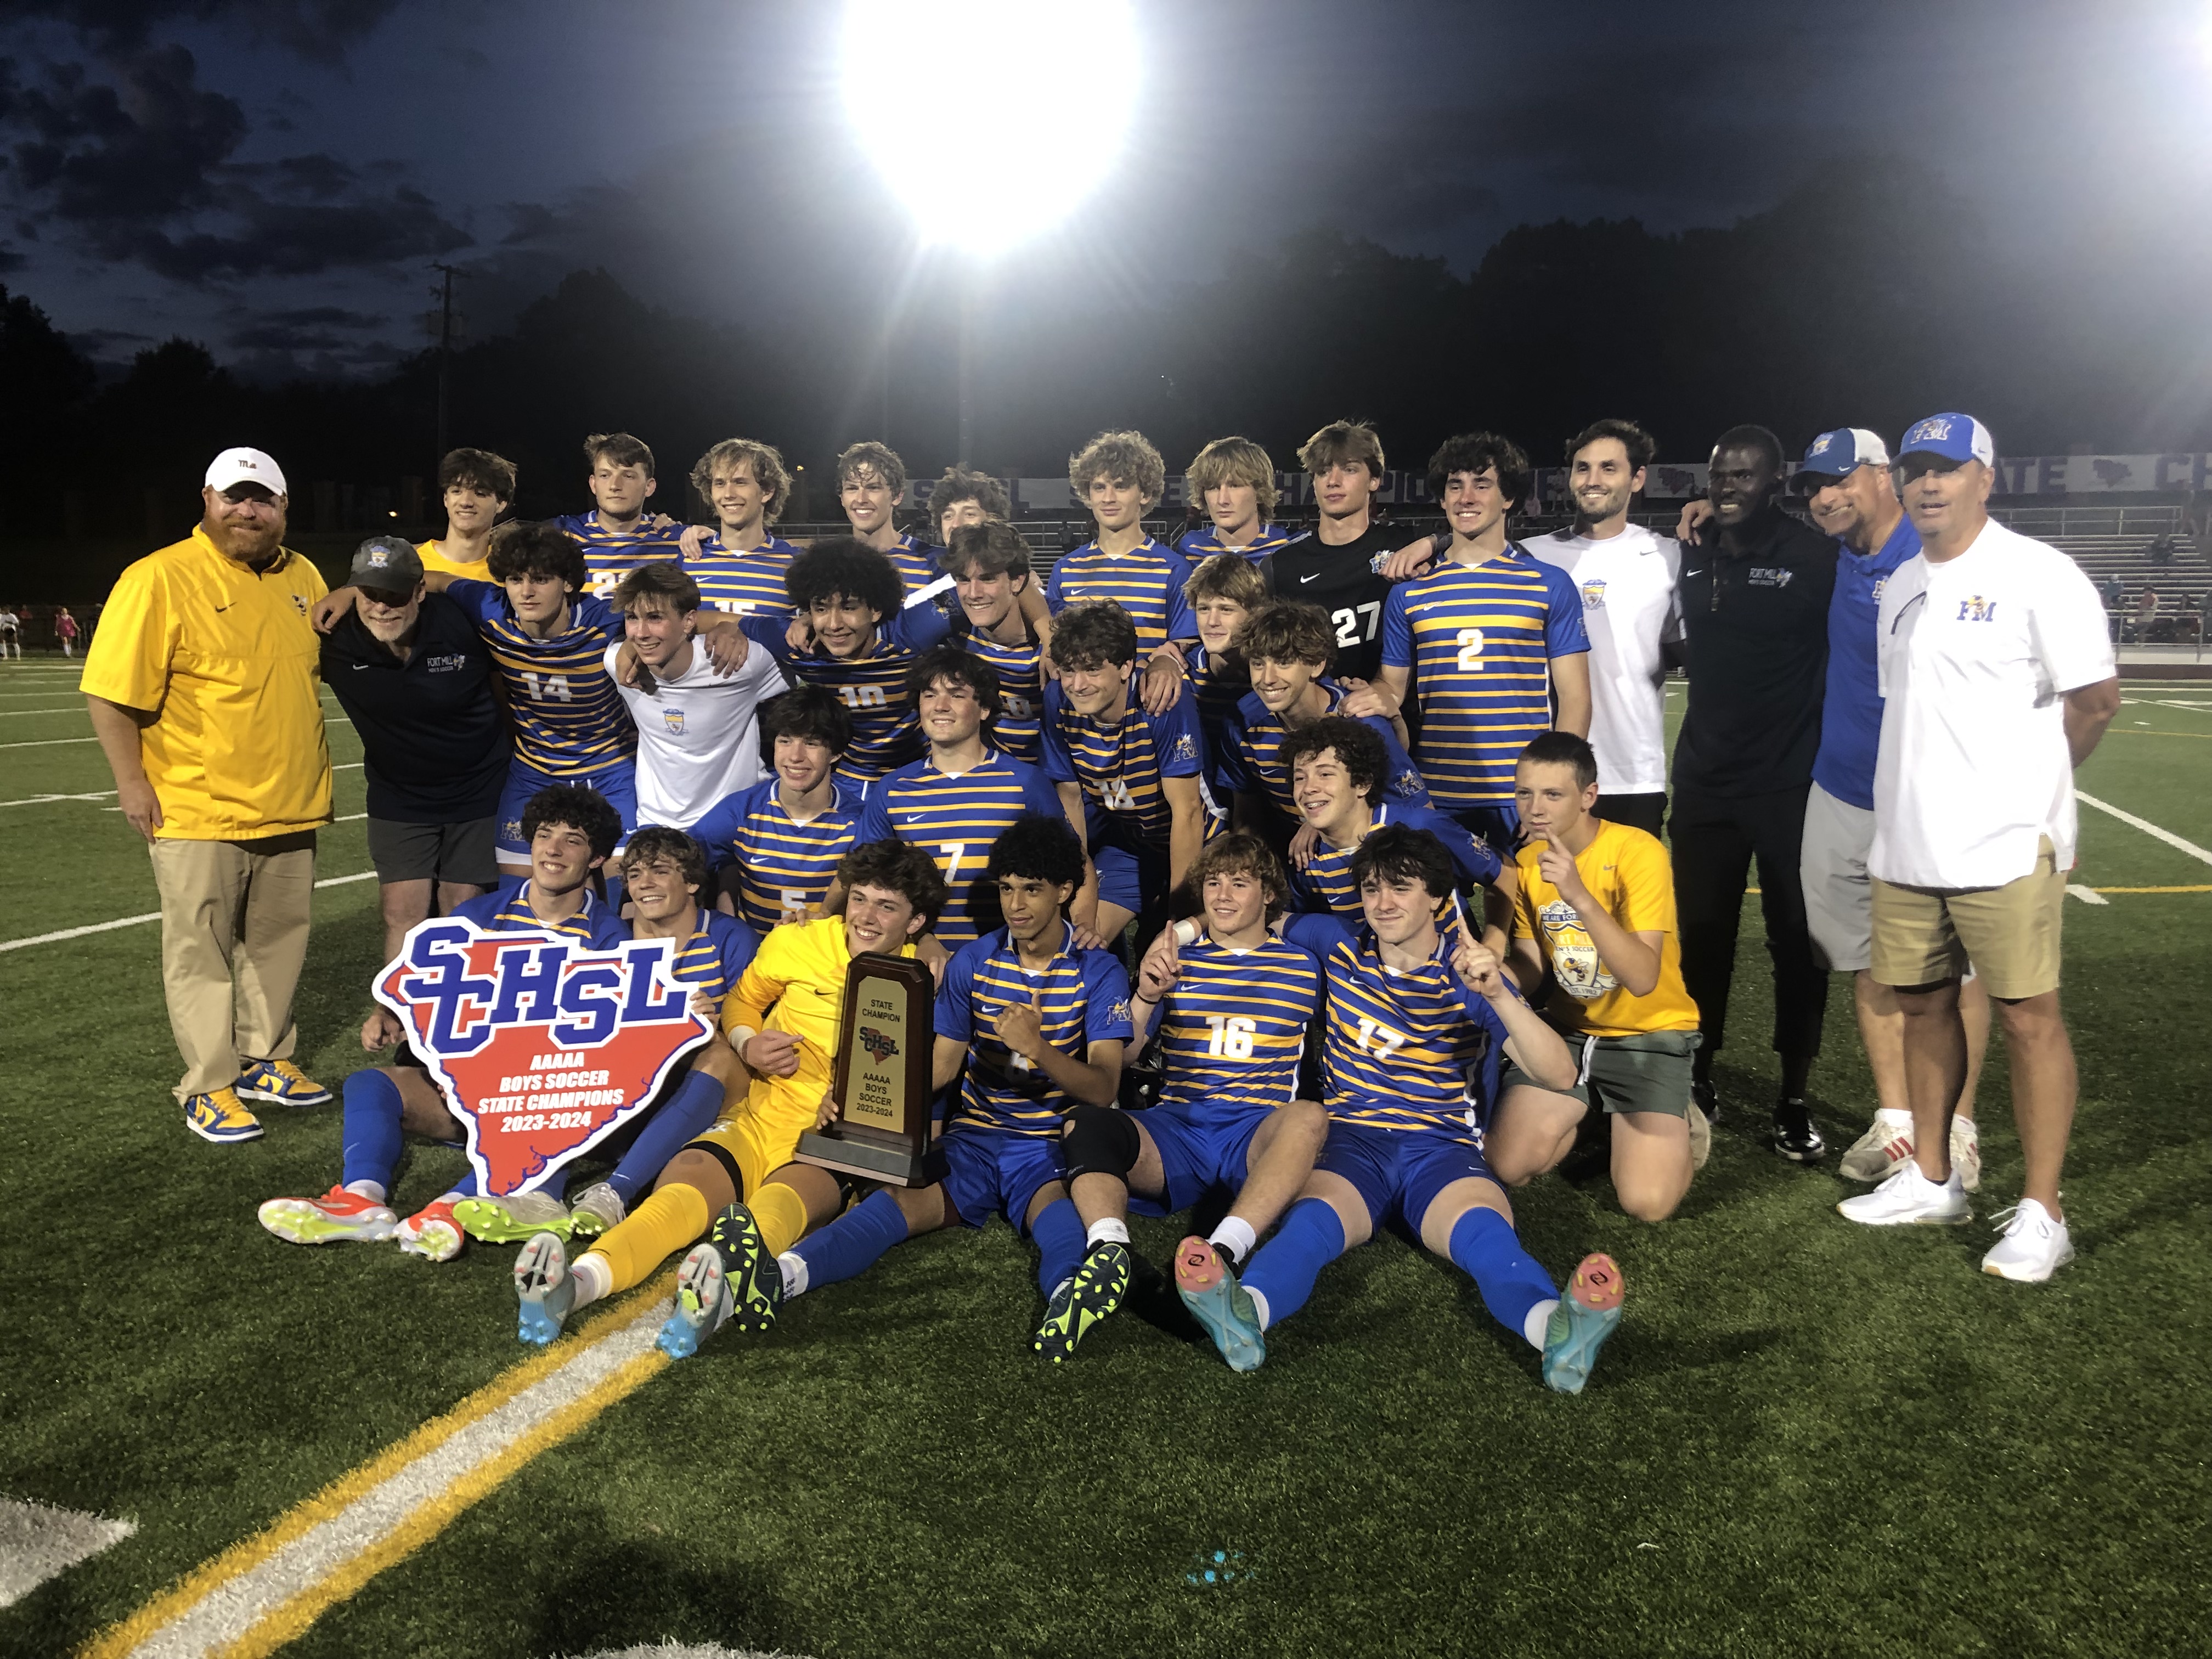 Fort Mill outlast weather, Stratford to claim 5A boys soccer championship